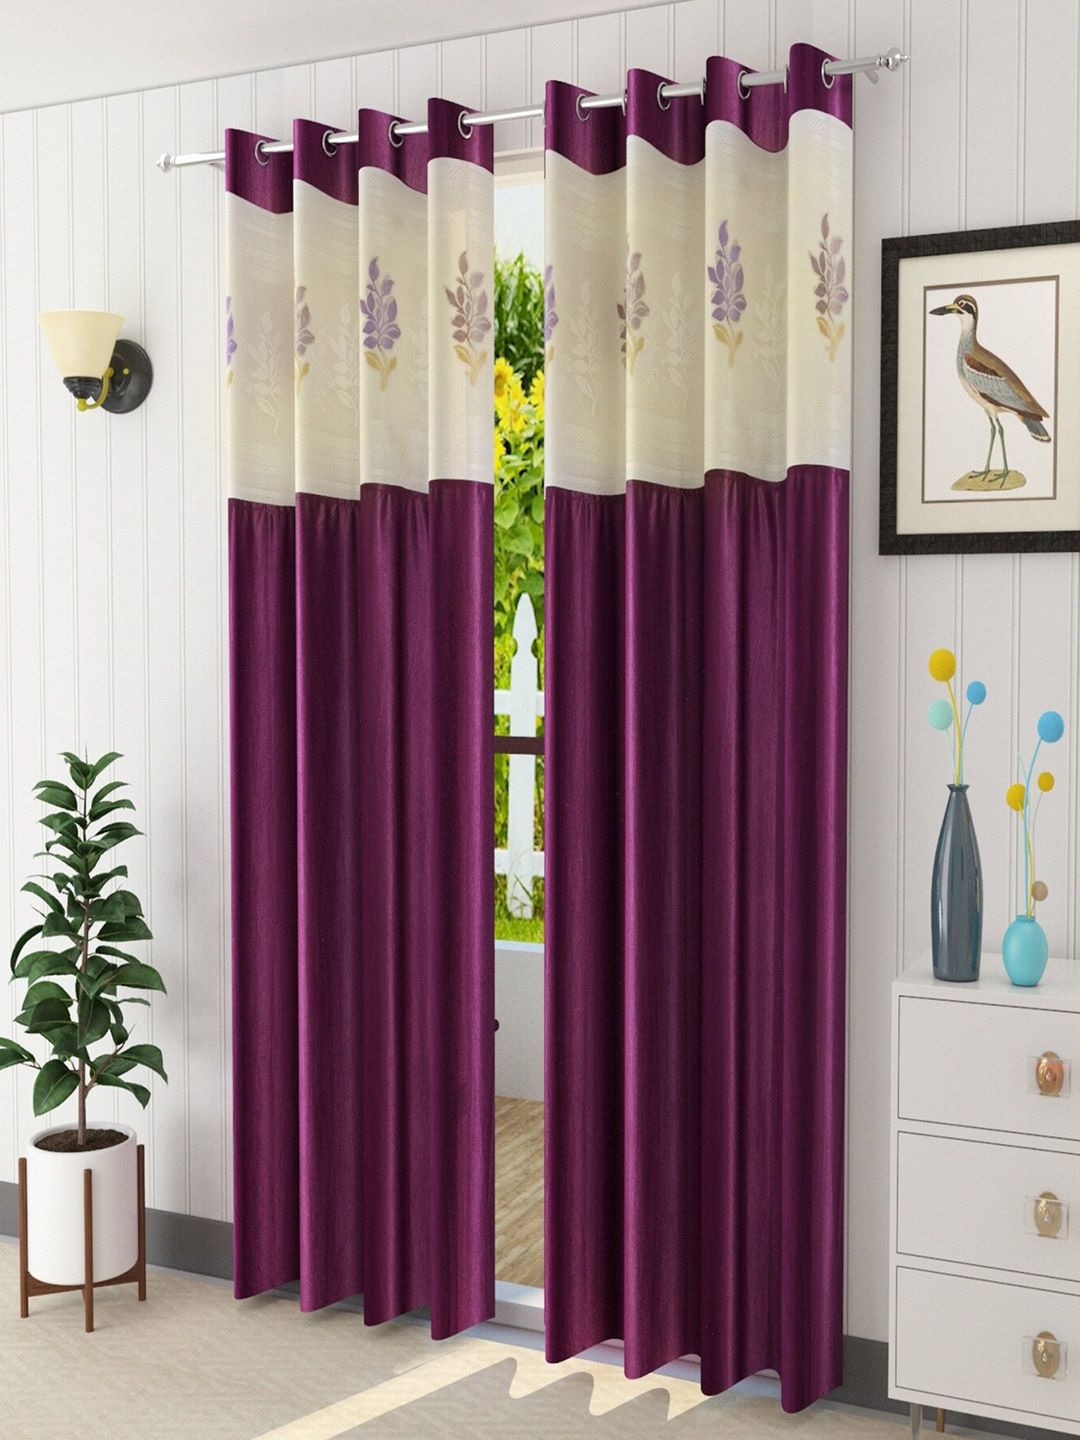 Homefab India Burgundy & White Set of 2 Floral Sheer Door Curtain Price in India